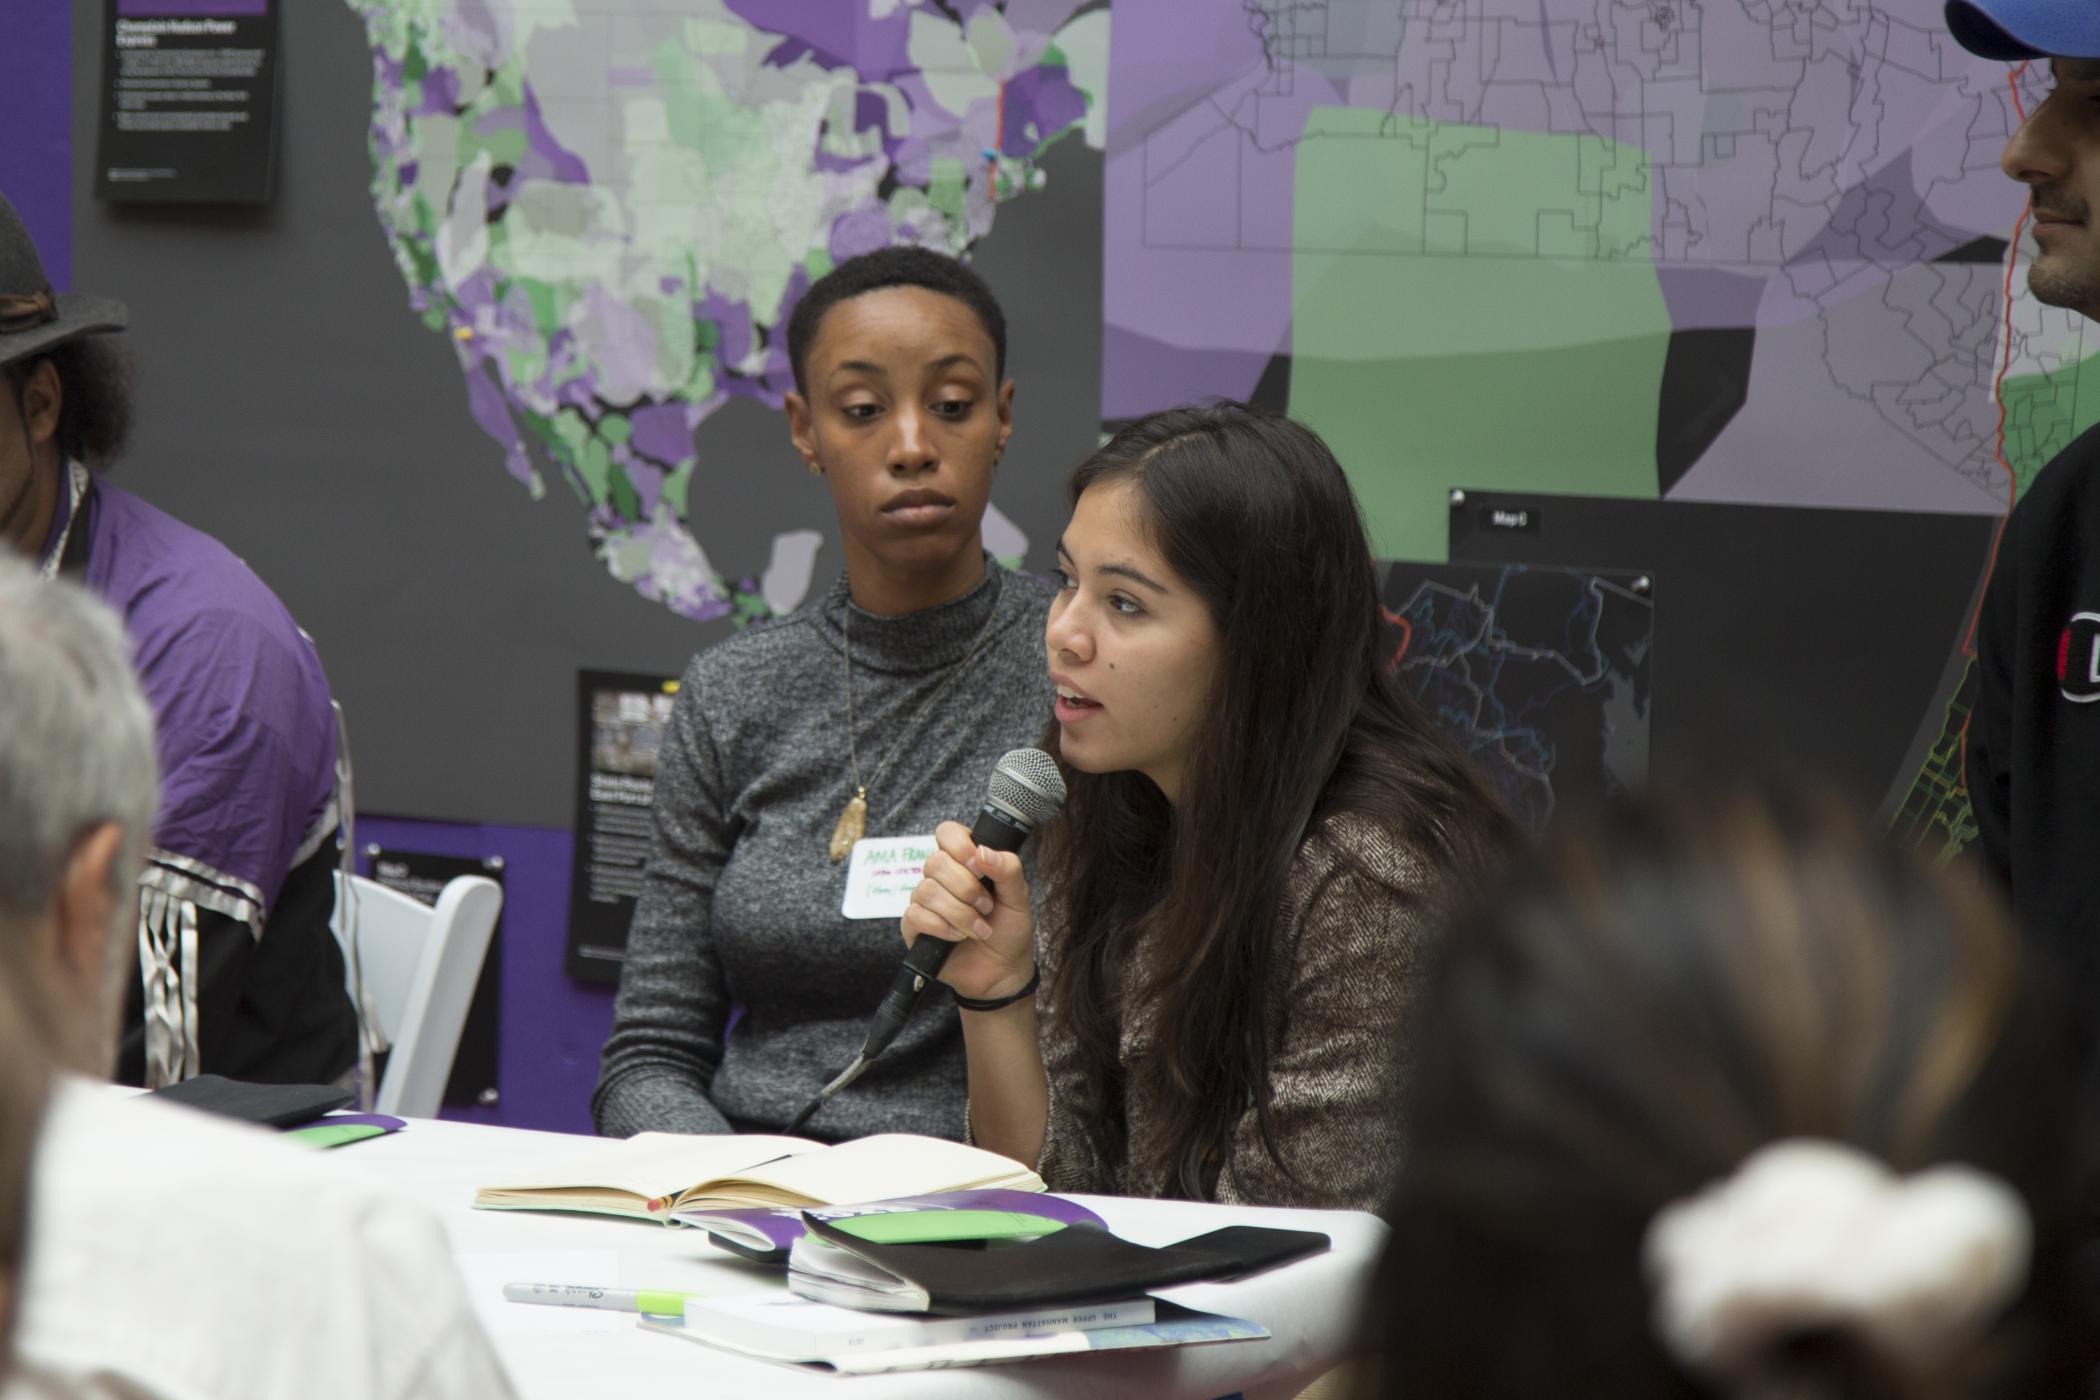 Xiye Bastida holds a microphone to speak as part of the "Democracy and Power" workshop while another participant watches her in front of a purple and green map of North America